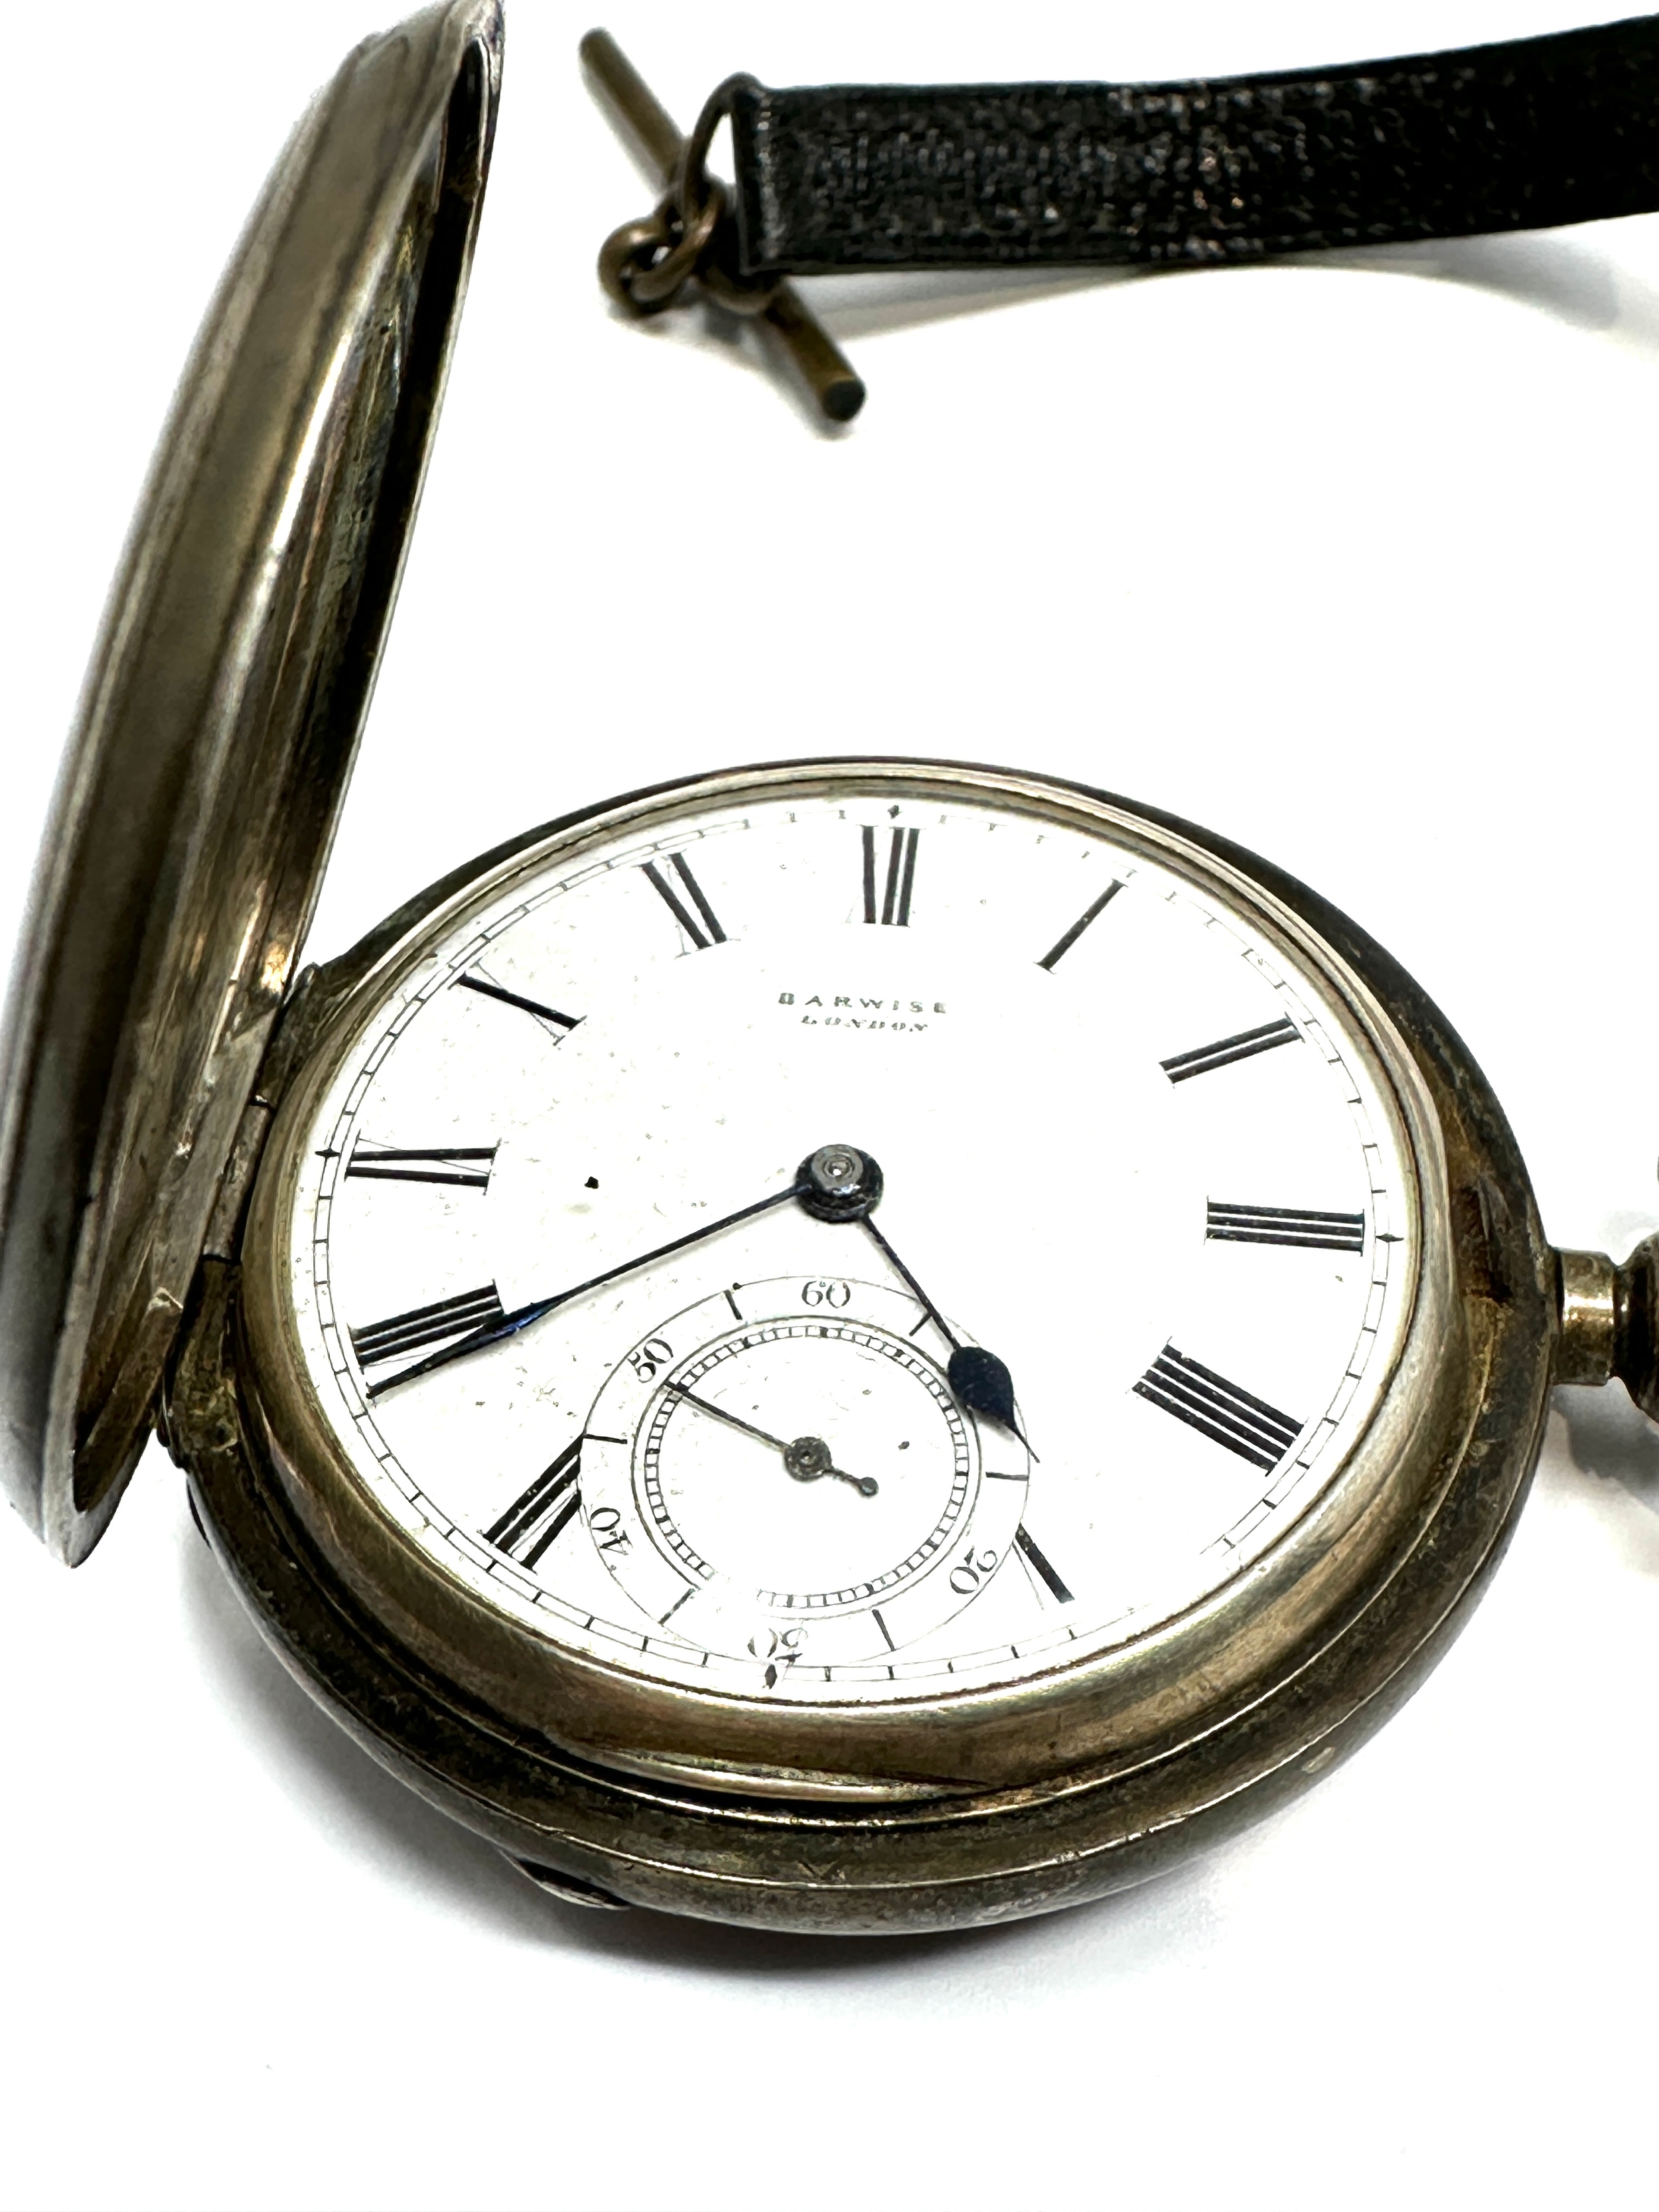 Antique fusee silver full hunter pocket watch barwise london the watch is not ticking - Image 2 of 4